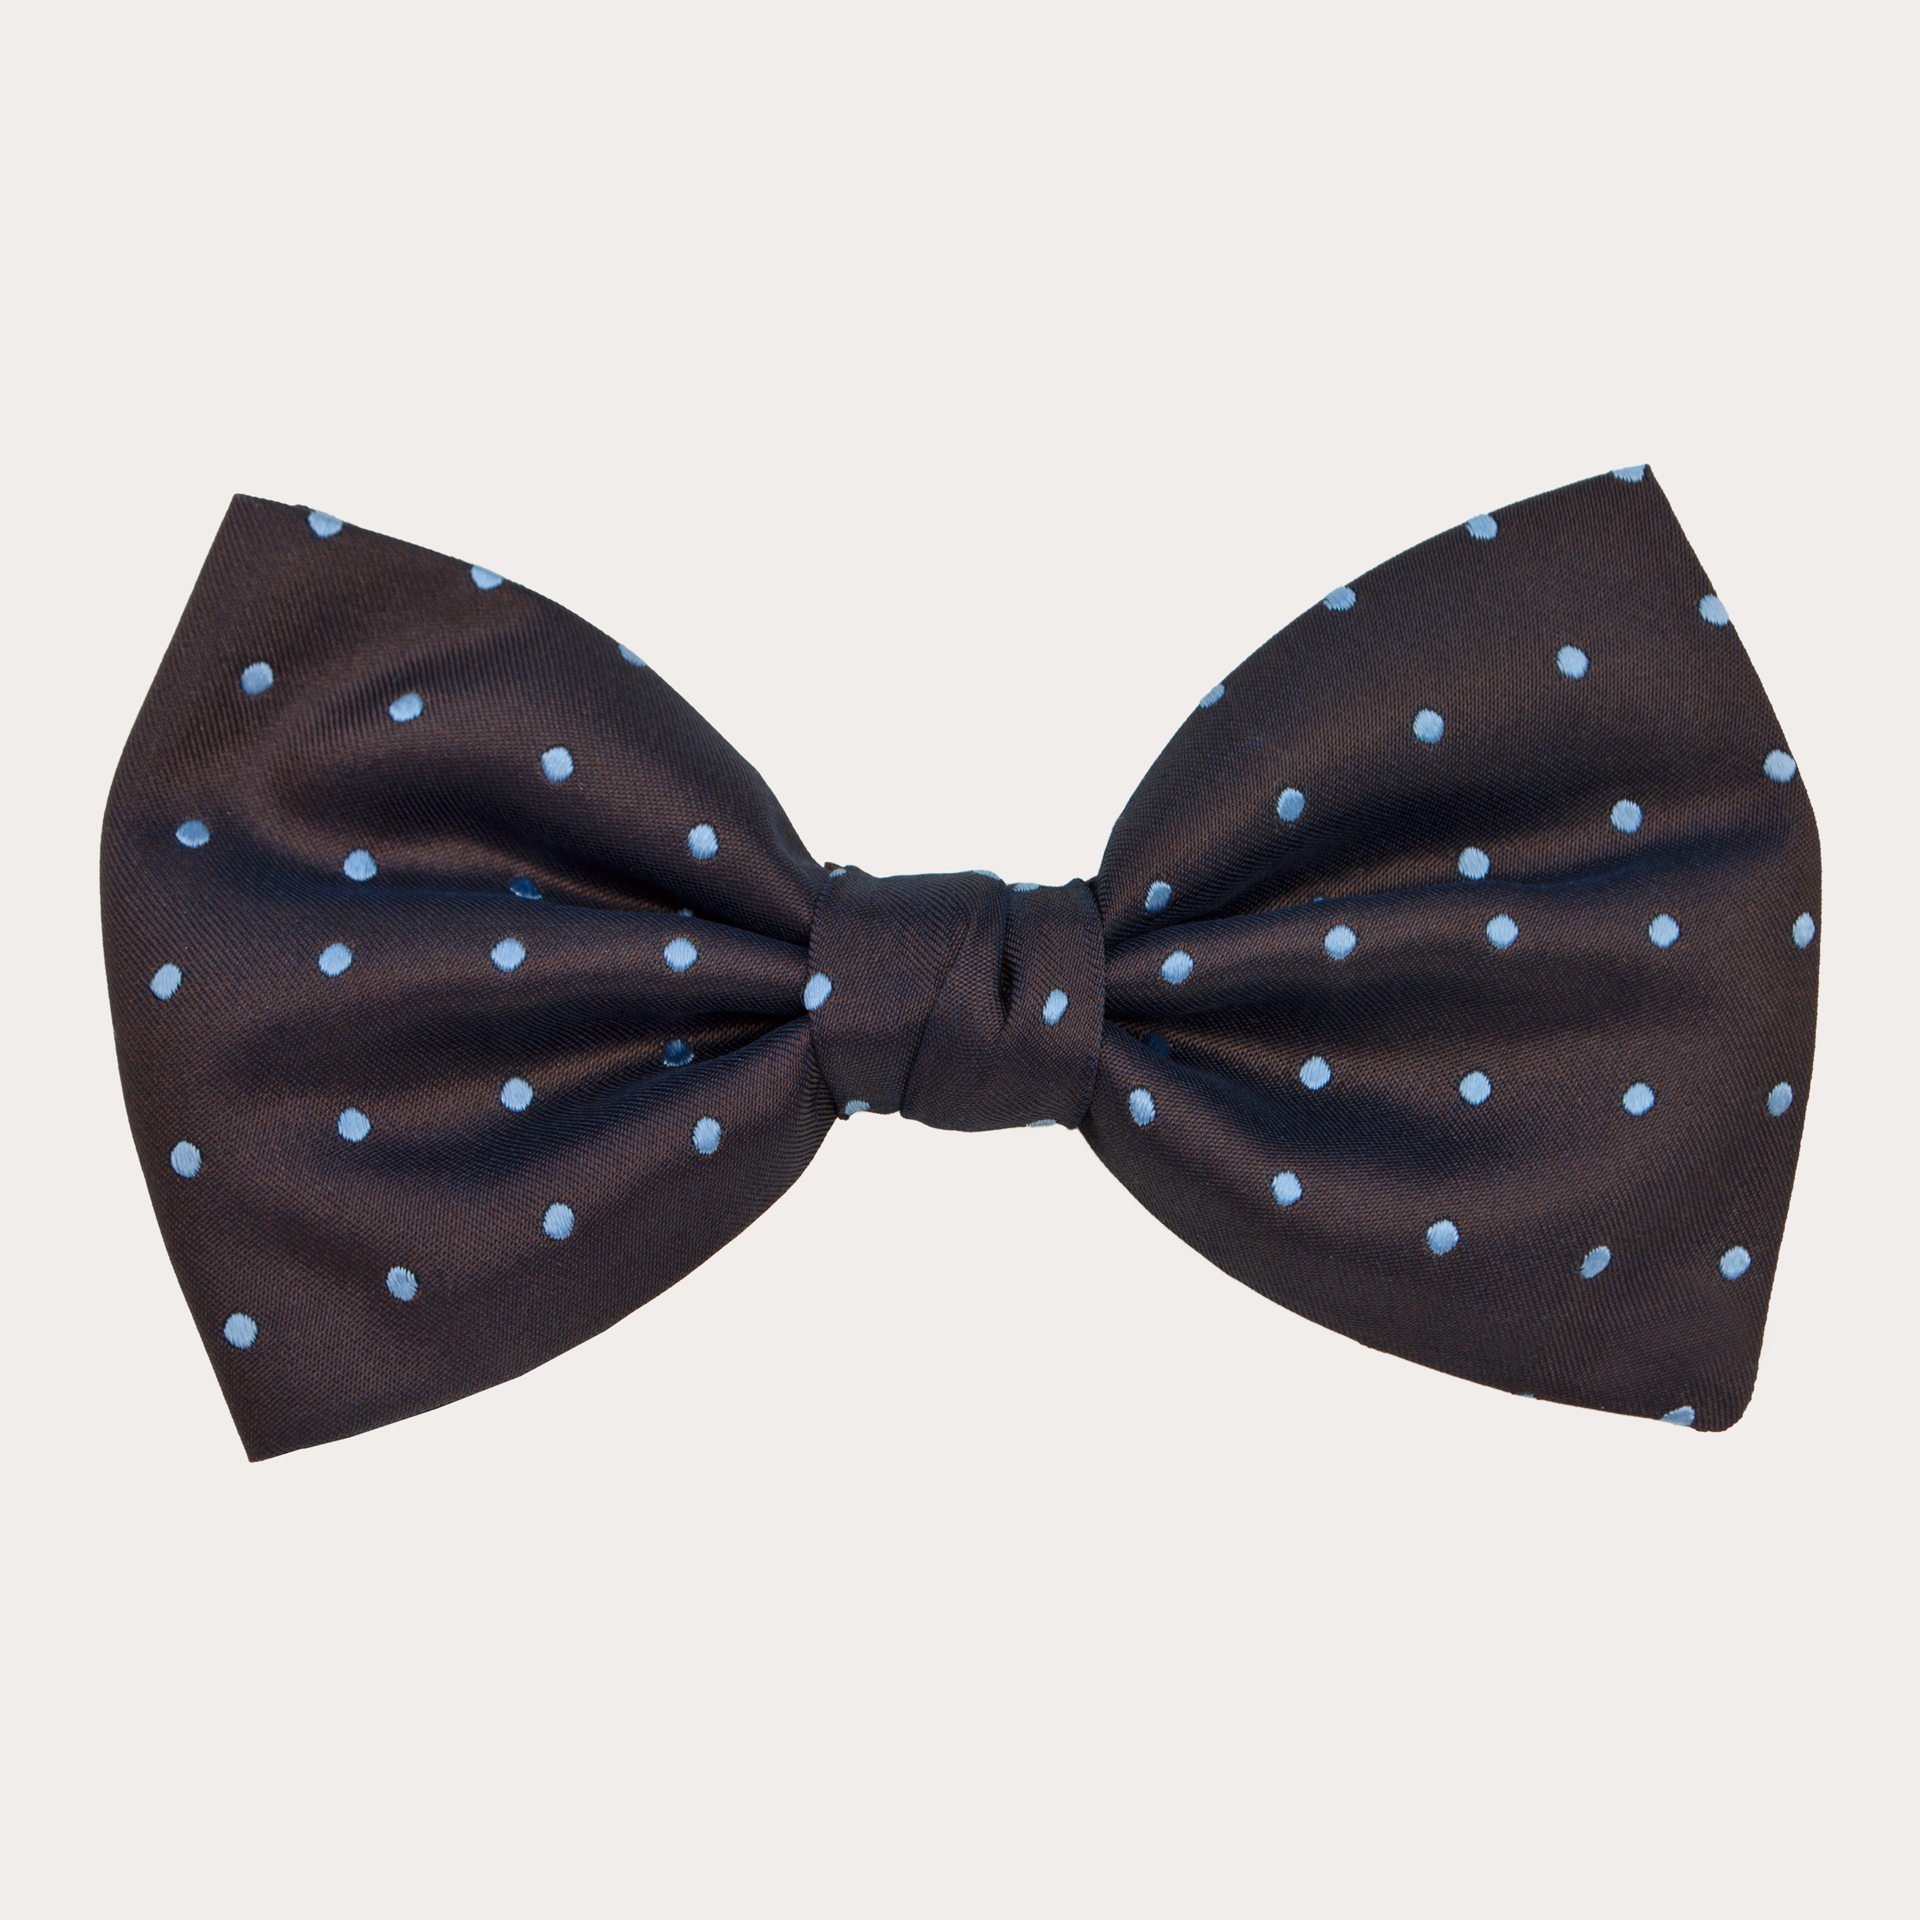 BRUCLE Elegant brown bow tie with light blue dotted pattern